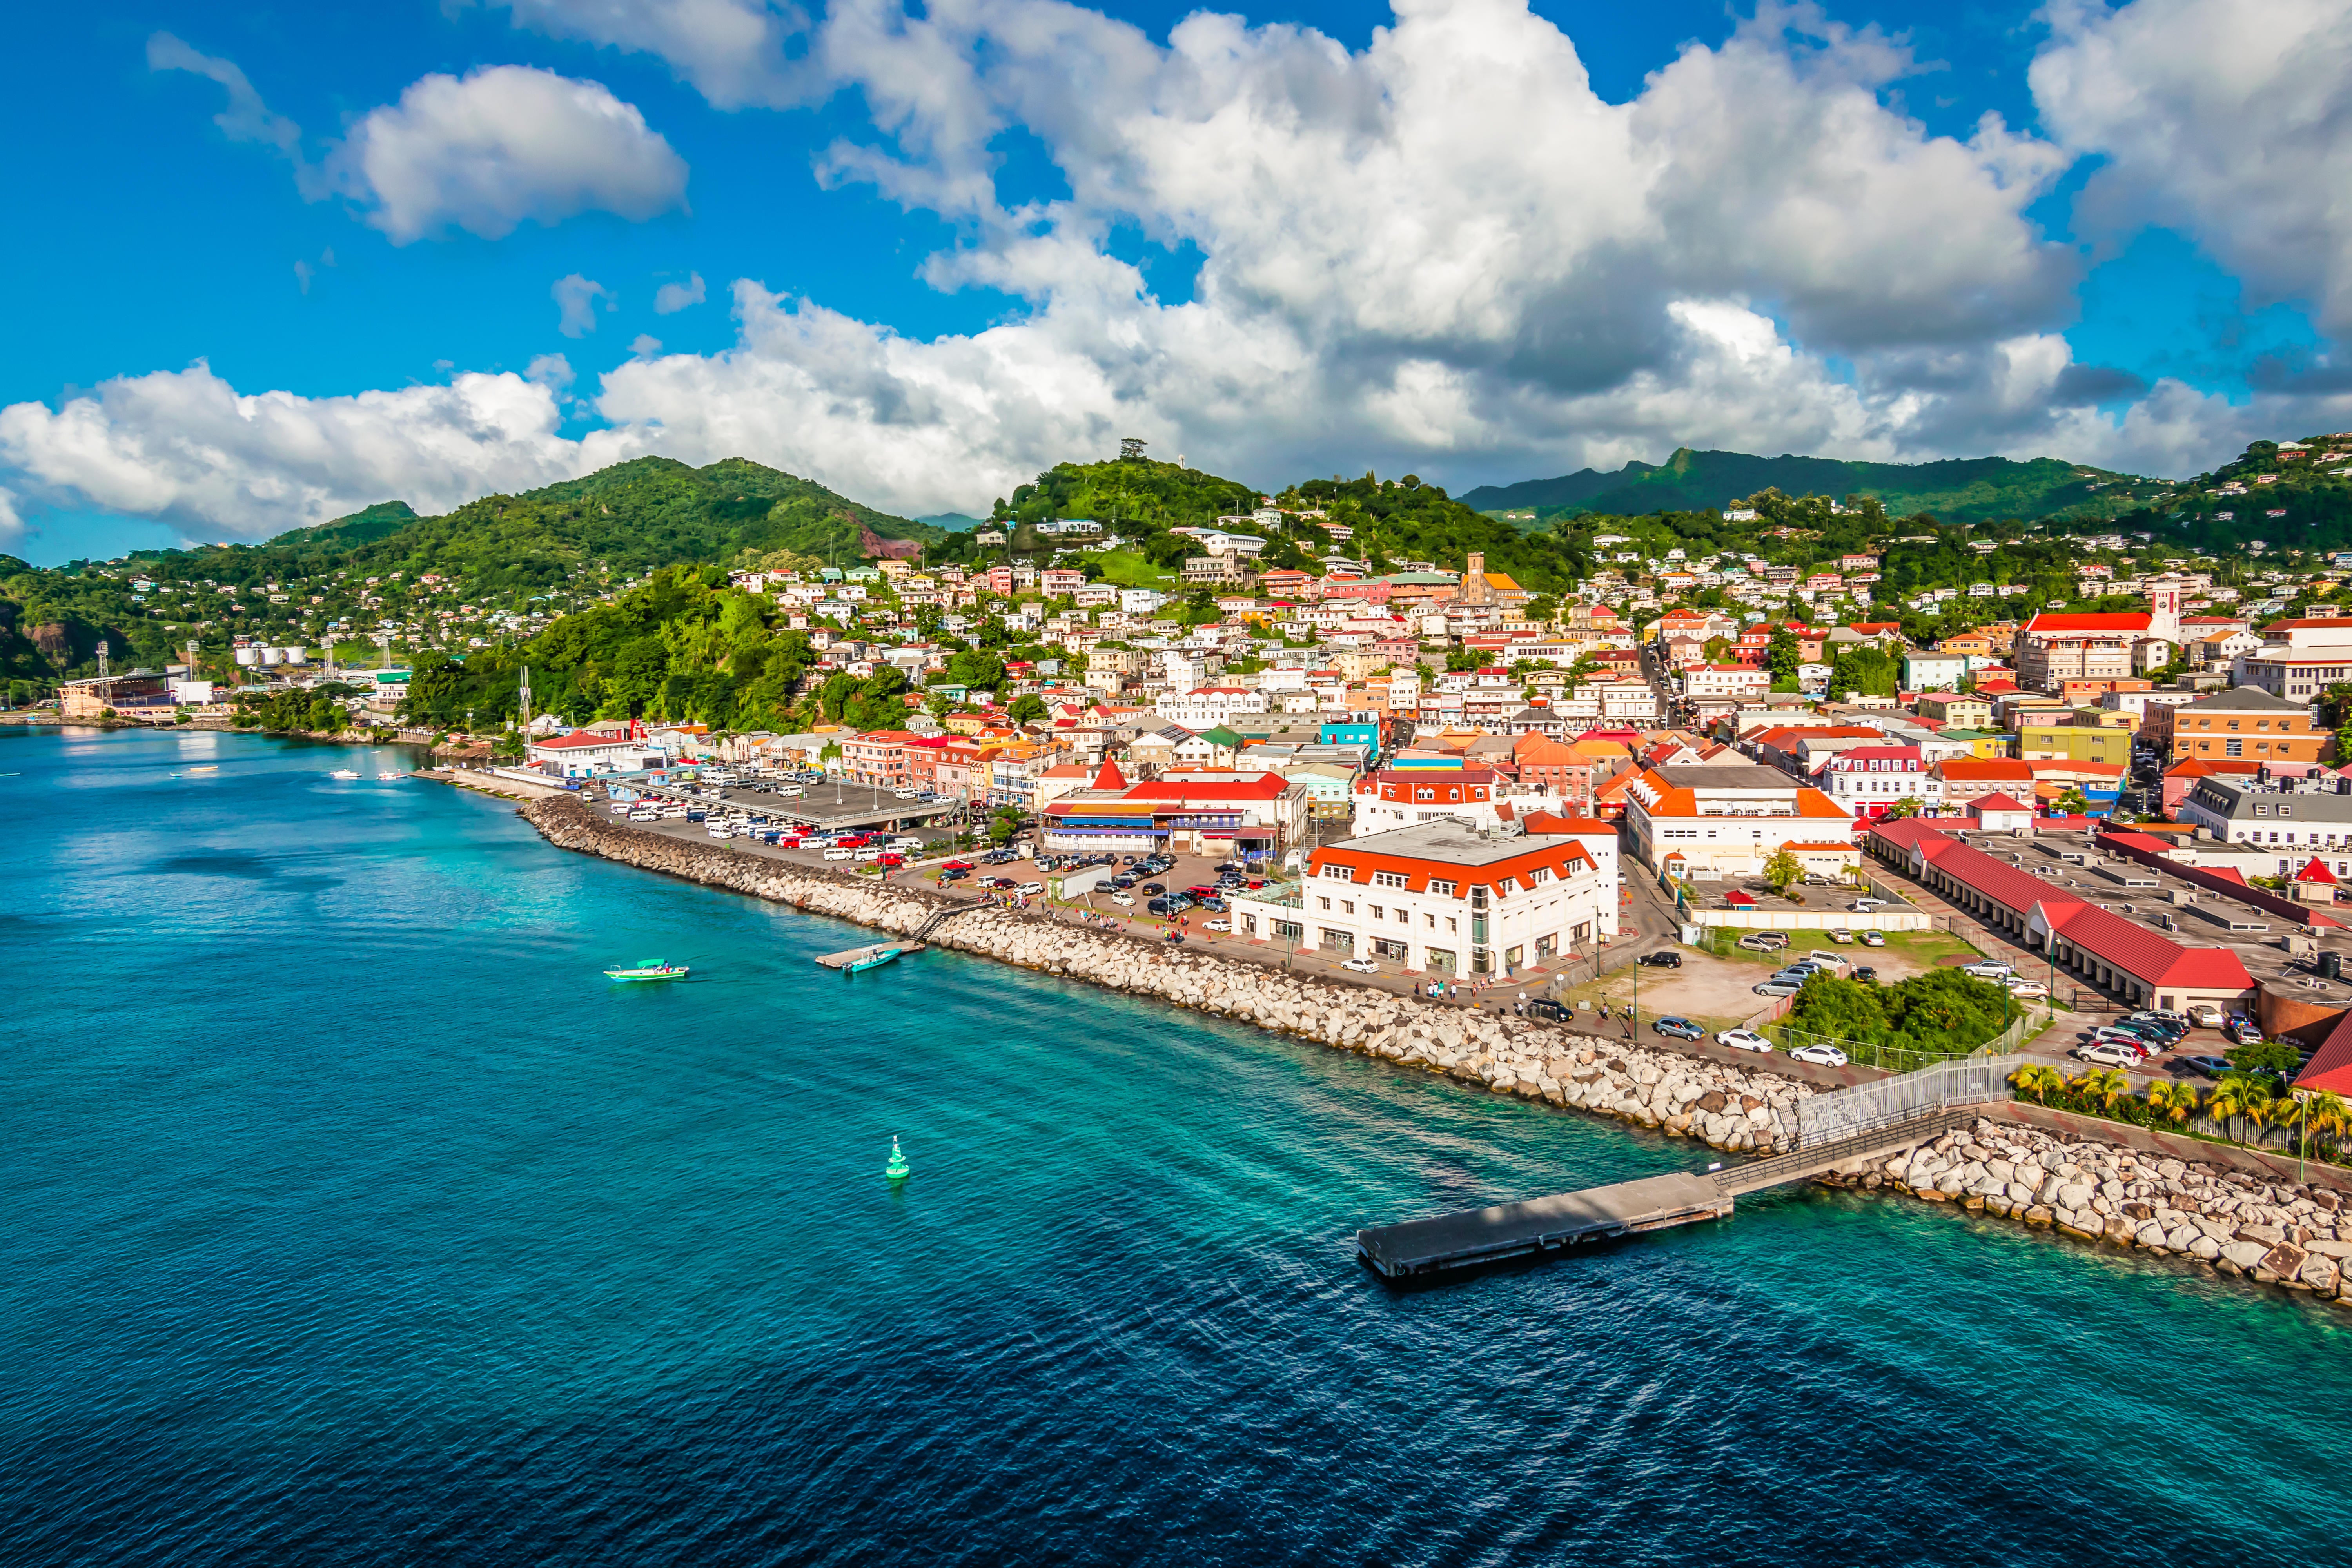 Dive into the vibrant islands of Grenada and discover a real feast for the senses